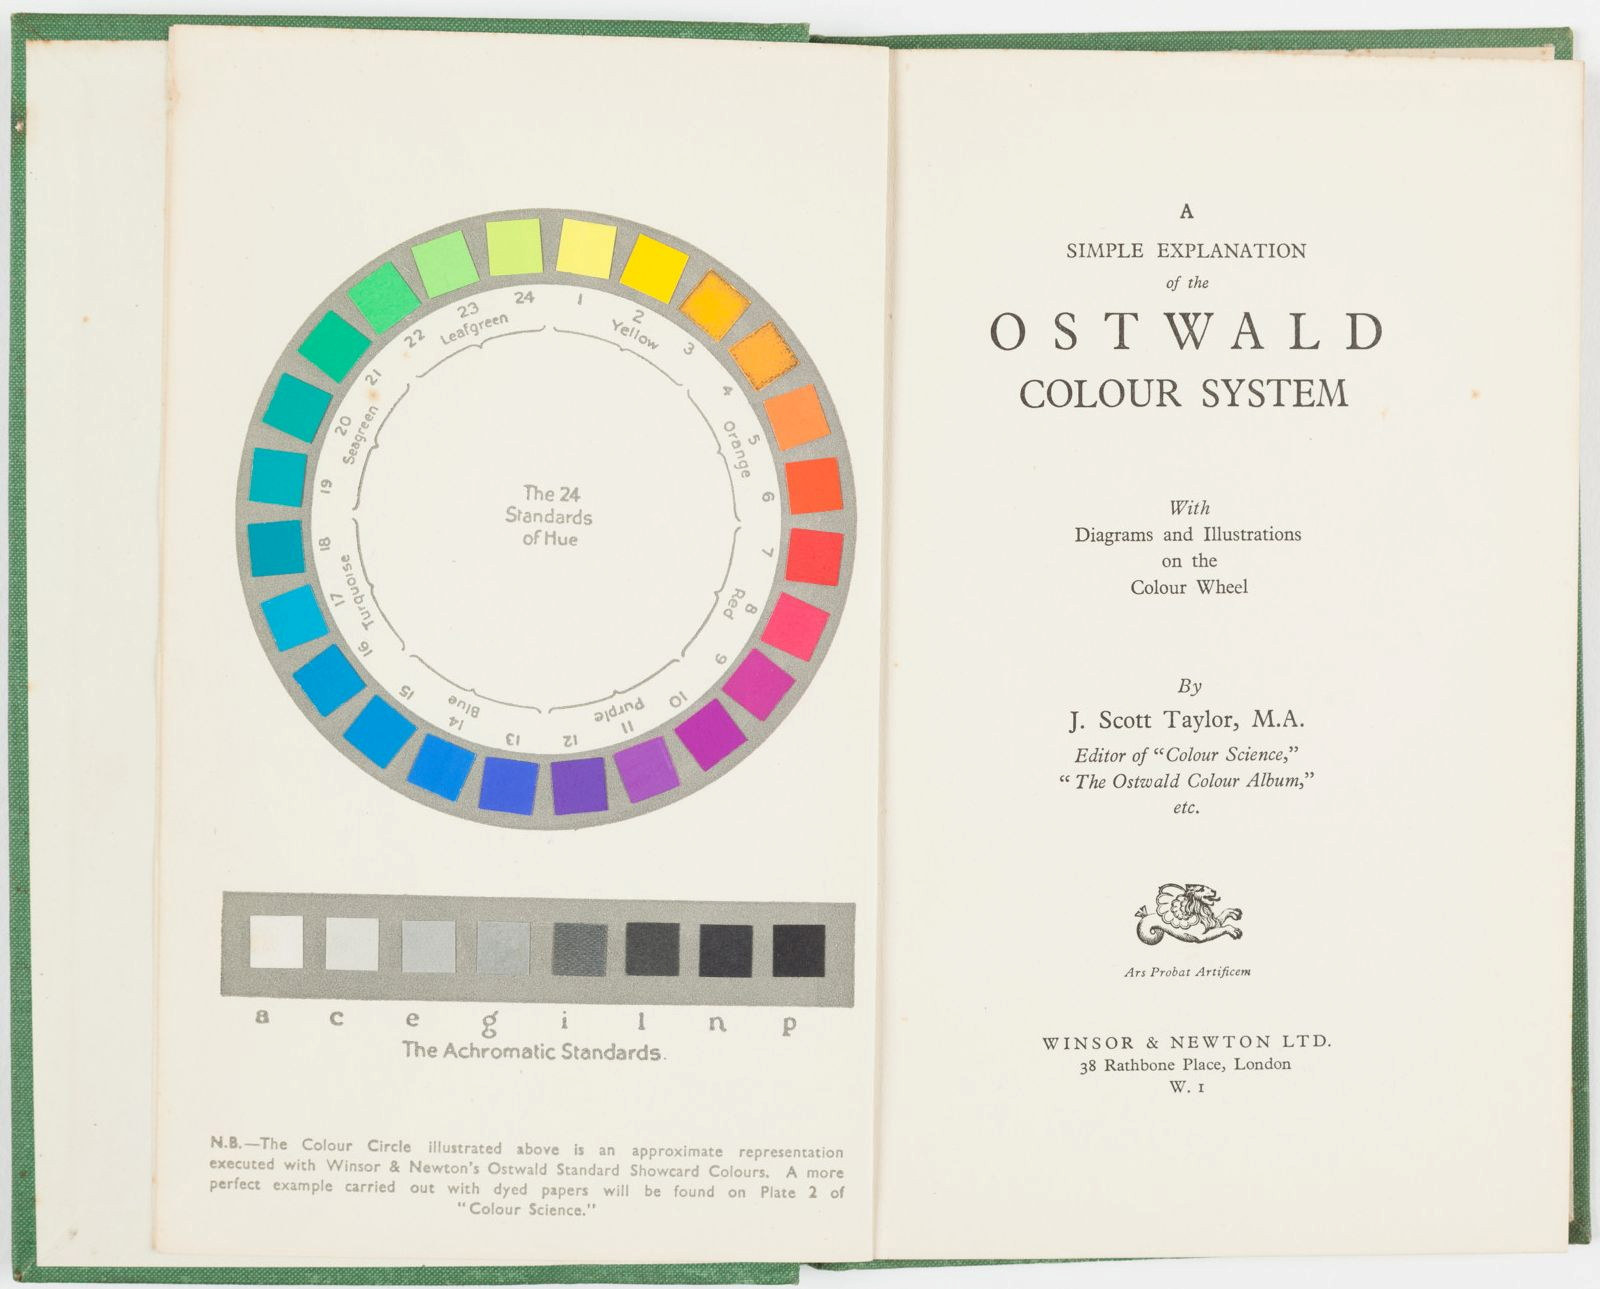 Colour chart and title page in 'A simple explanation of the Ostwald colour system' by J. Scott Taylor, 1935